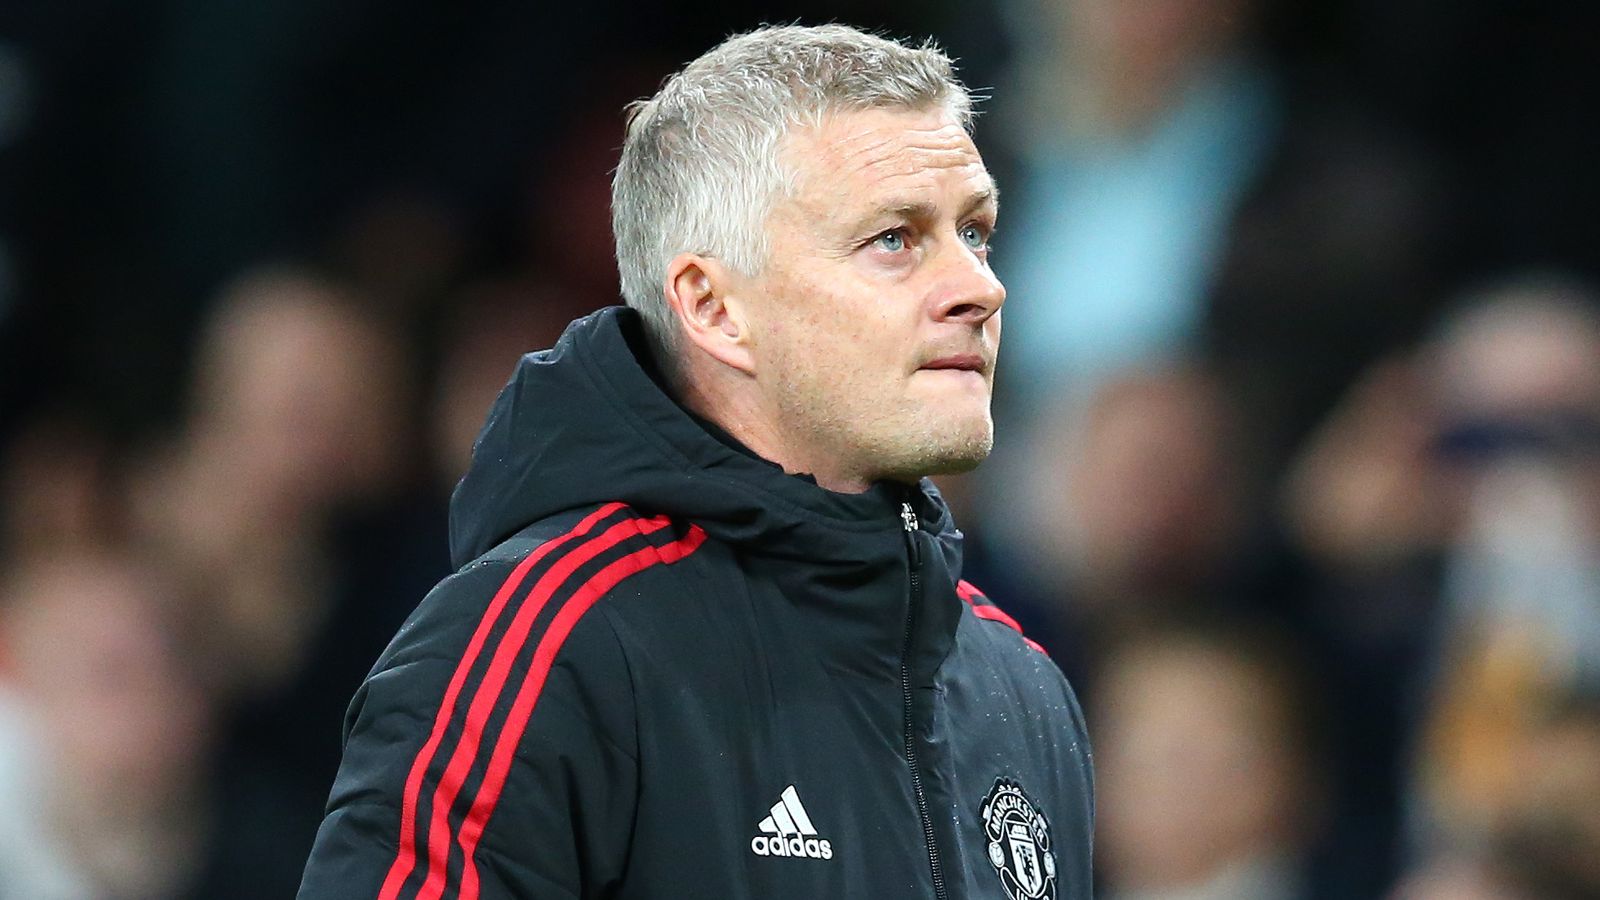 Ole Gunnar Solskjaer: Manchester United coach escaped after 5-0 loss to Liverpool Paul Merson